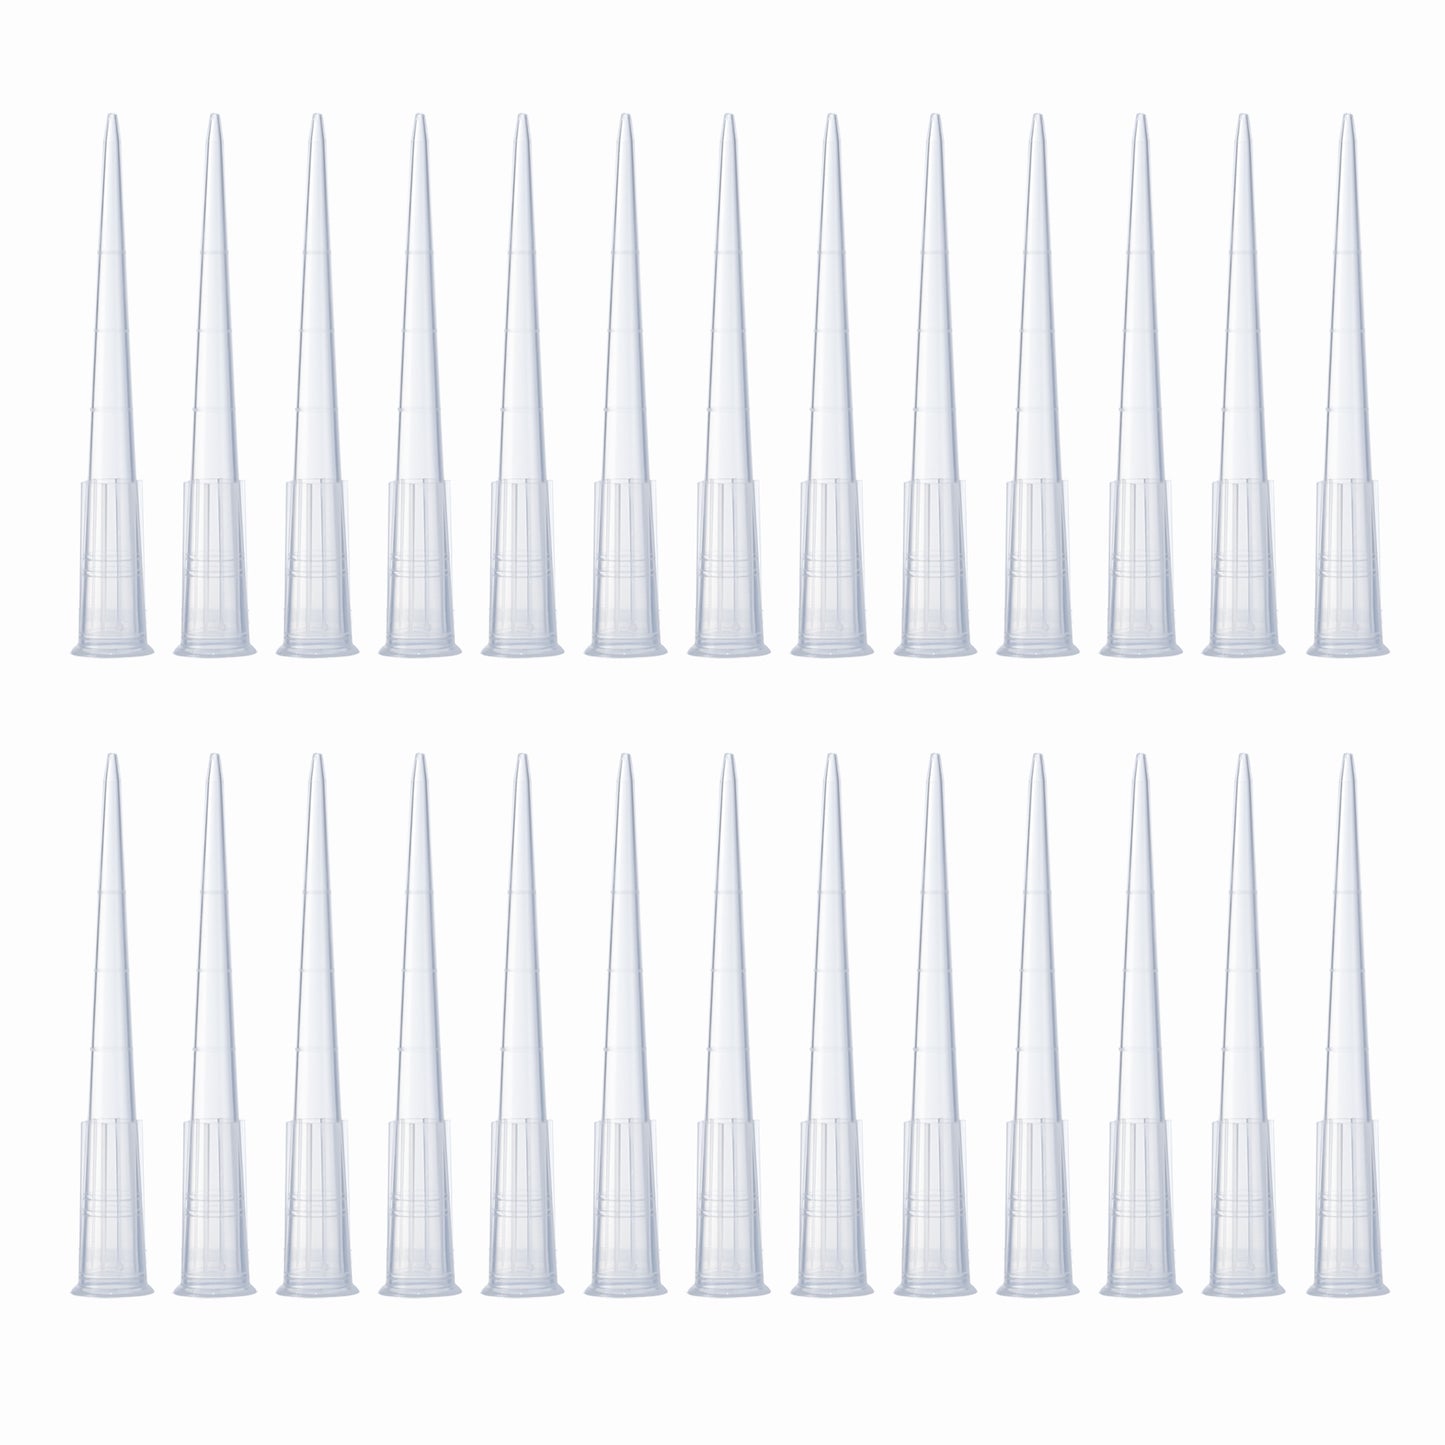 Racked, Low Retention, Non-Filter Pipette Tips for .1ul - 1250uL Pipettes